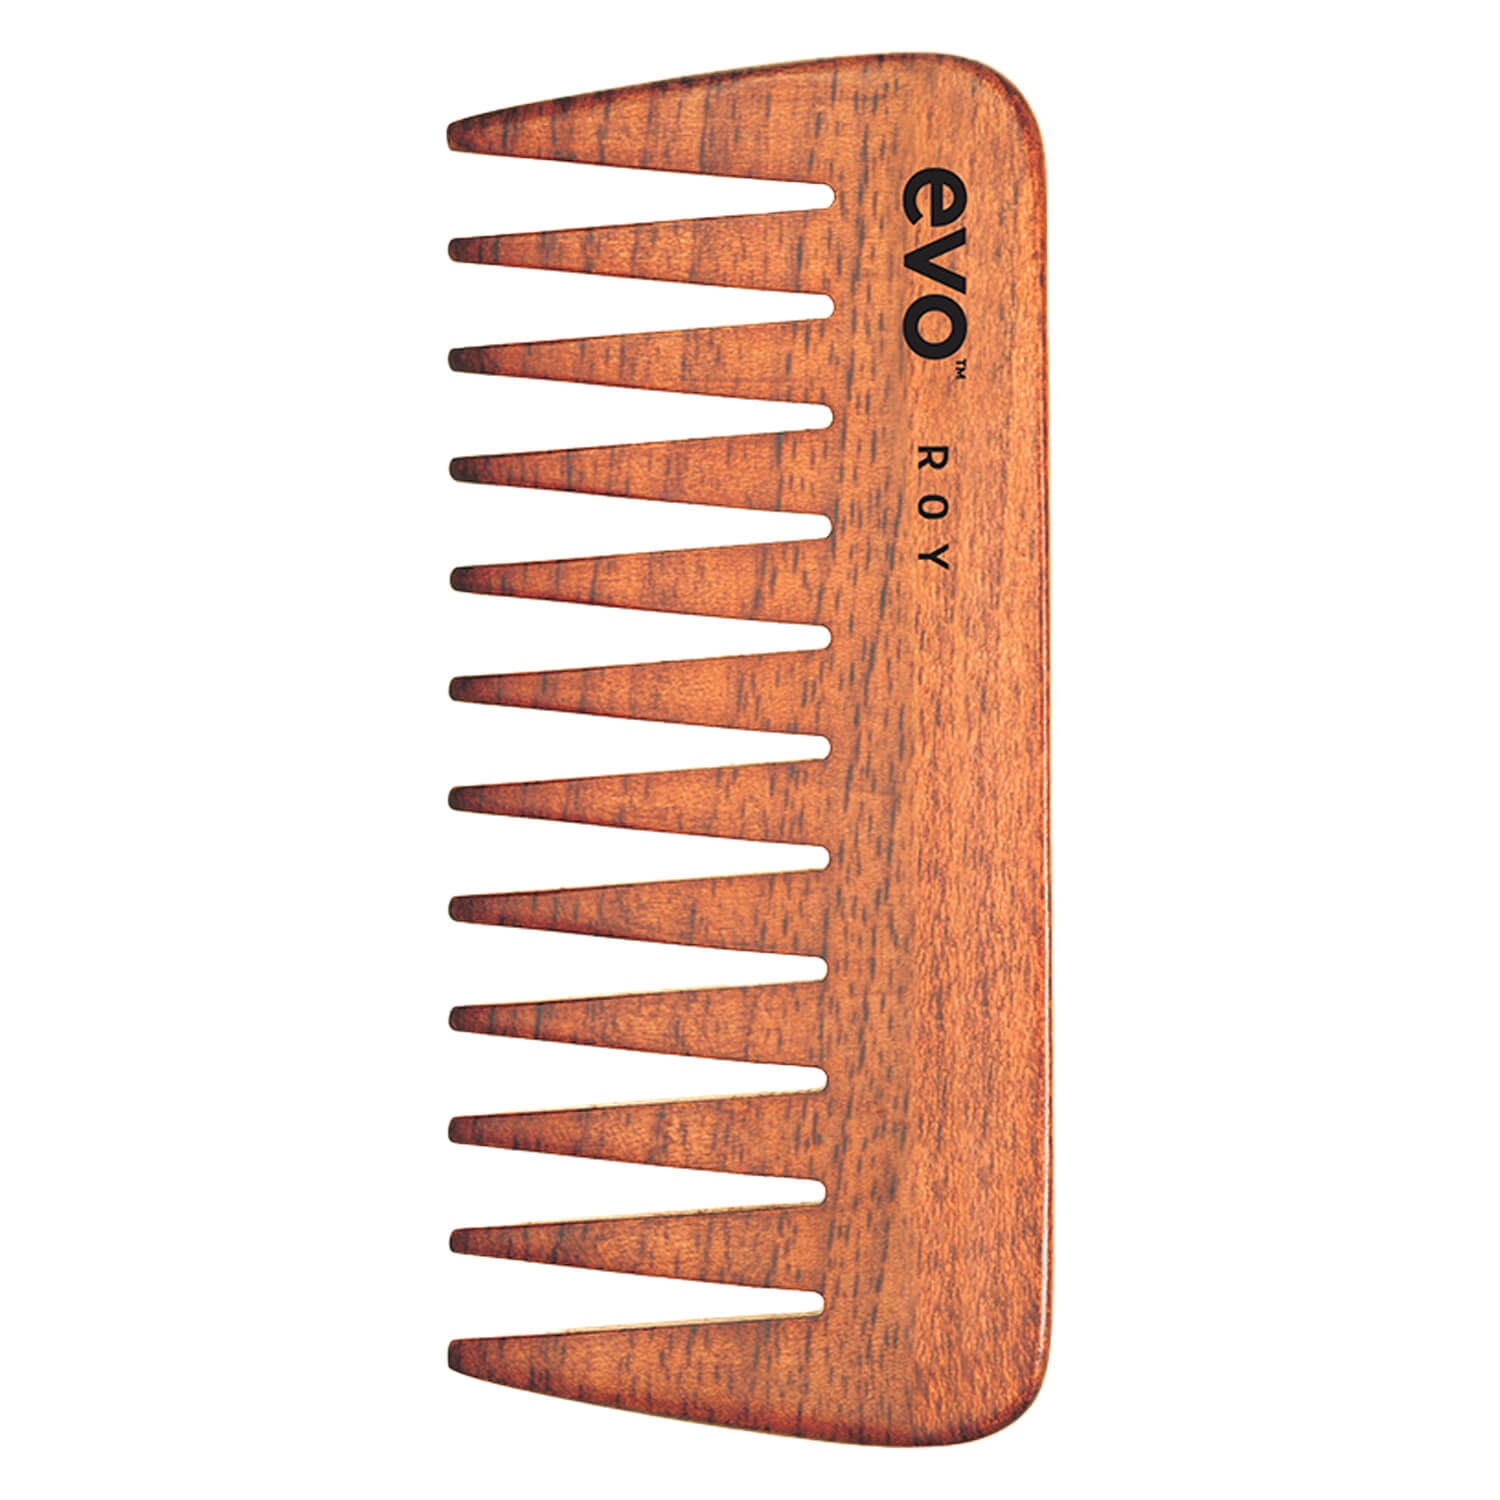 Product image from evo brushes - roy wide-tooth comb